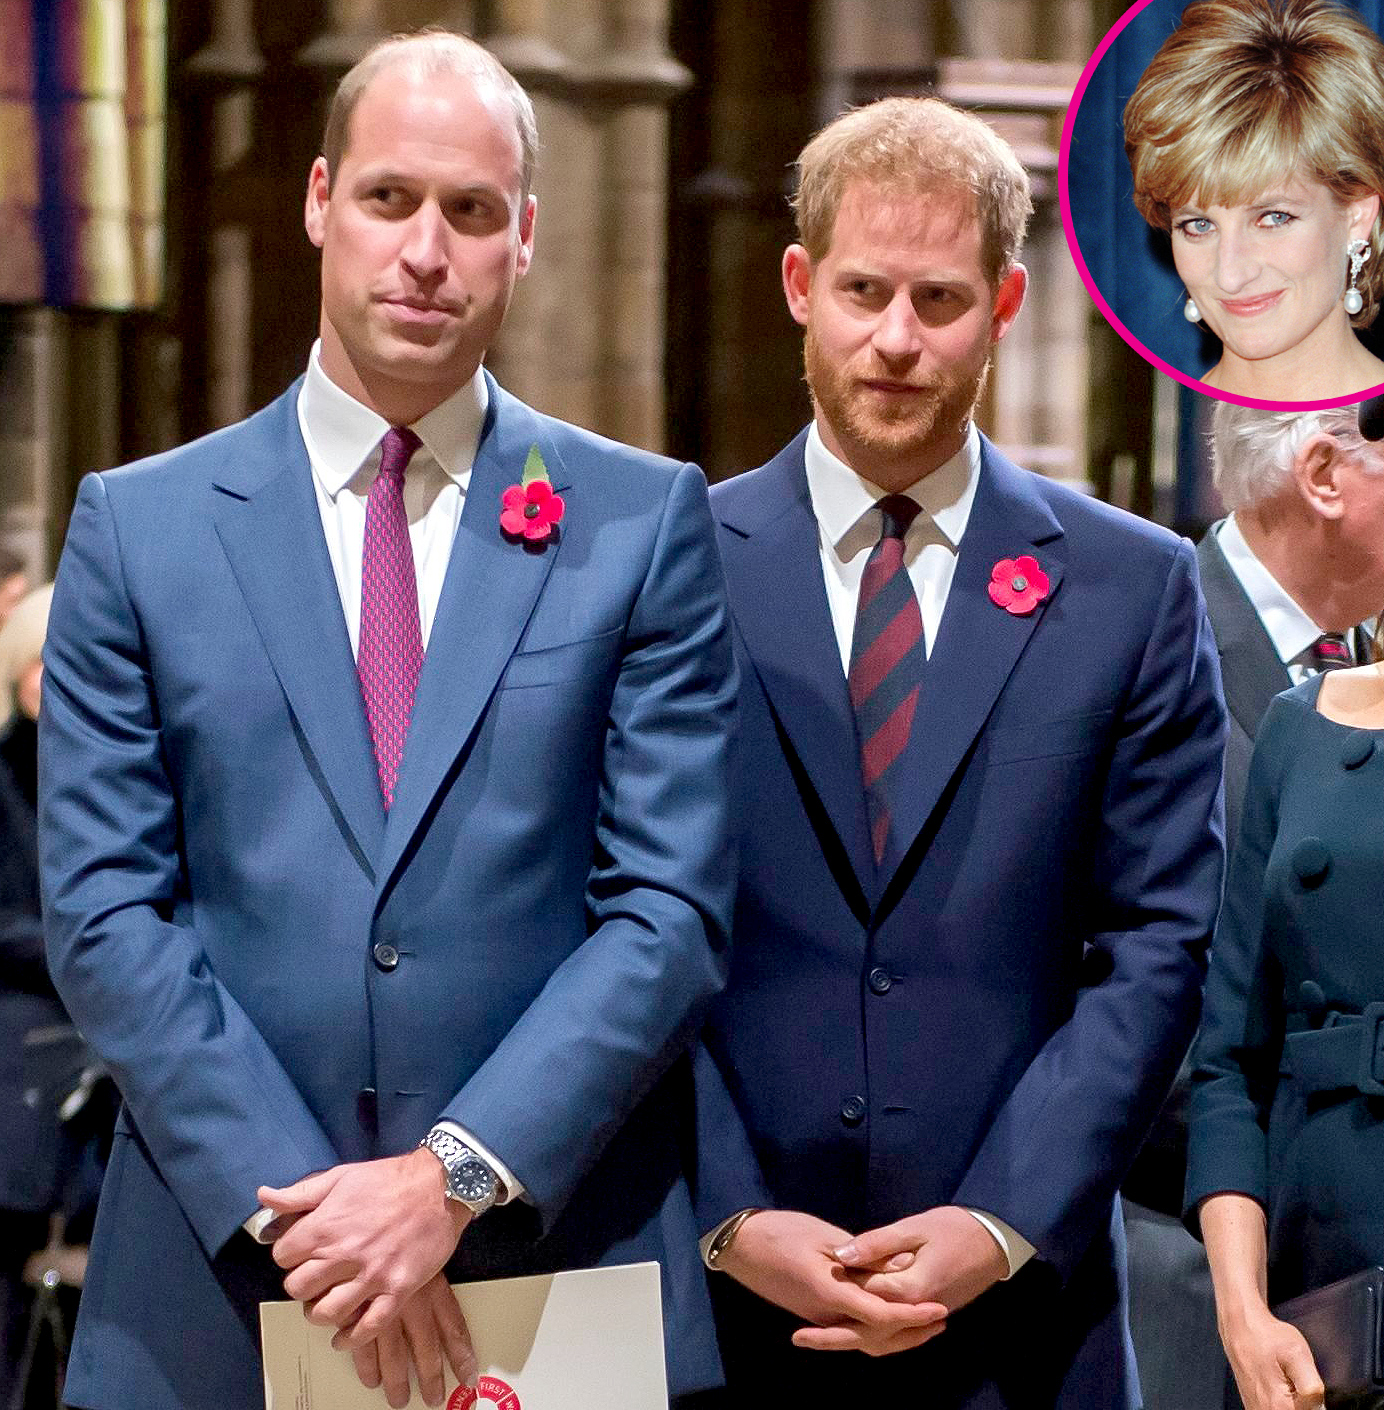 Prince William, Harry Issue Joint Statement to Honor Mom Princess Diana